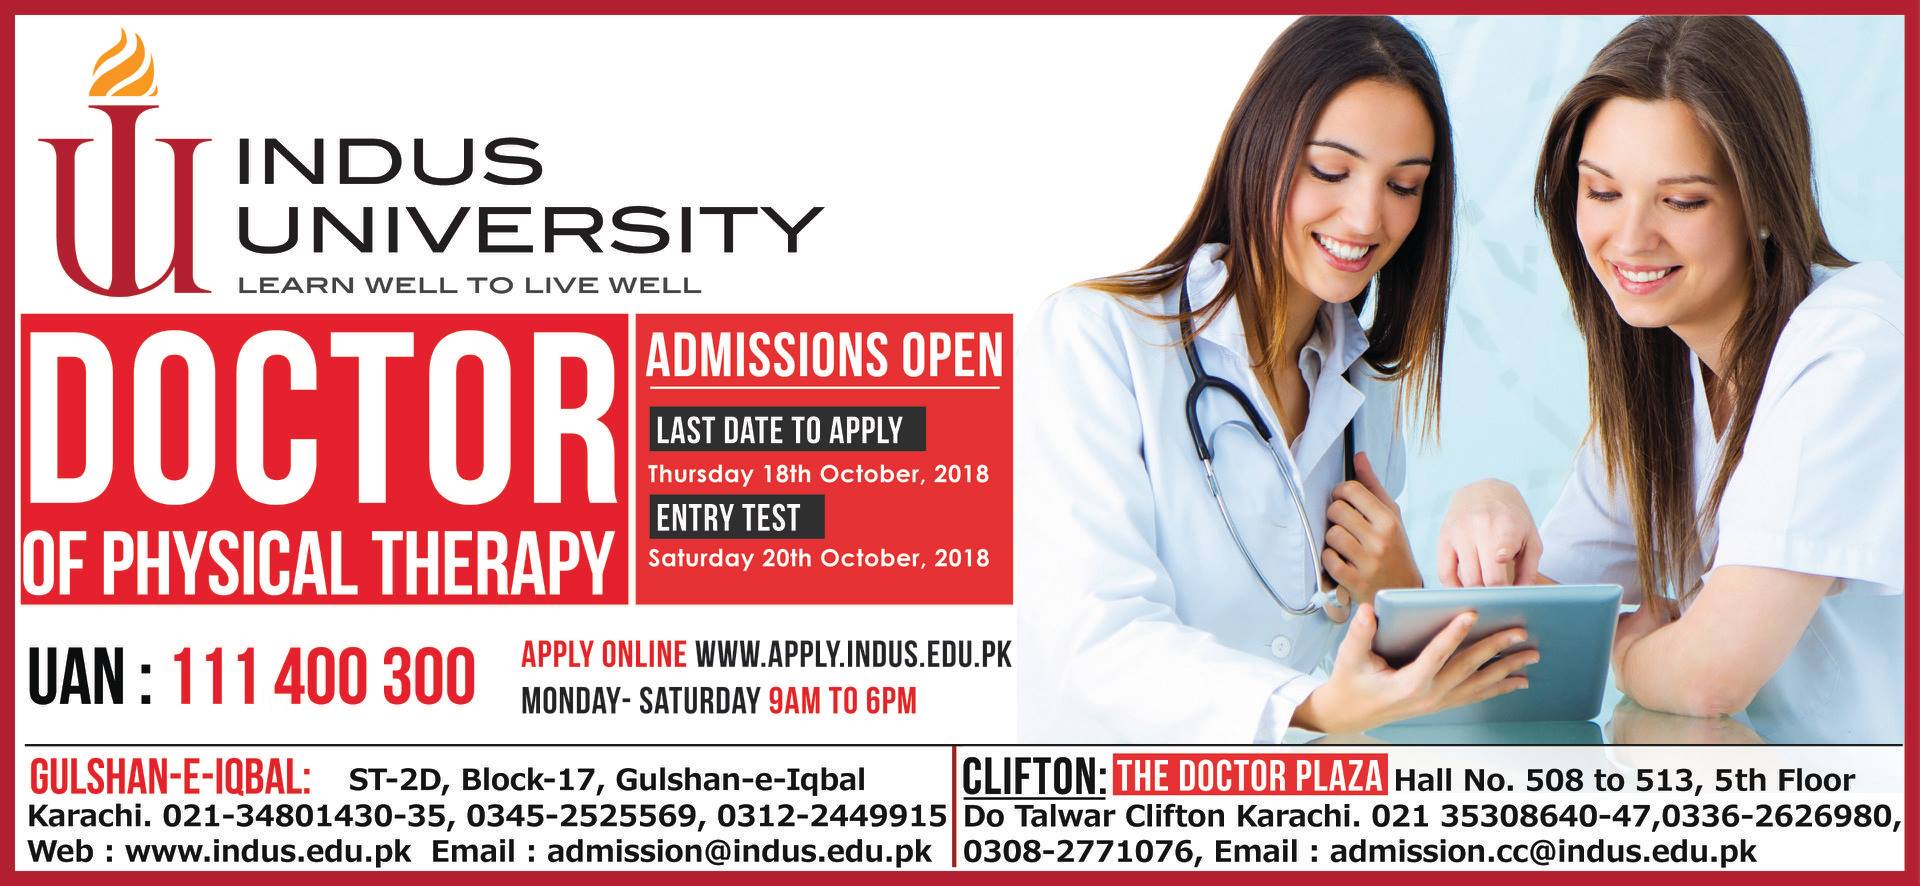 Indus University Department of Physical Therapy and Rehabilitation Sciences